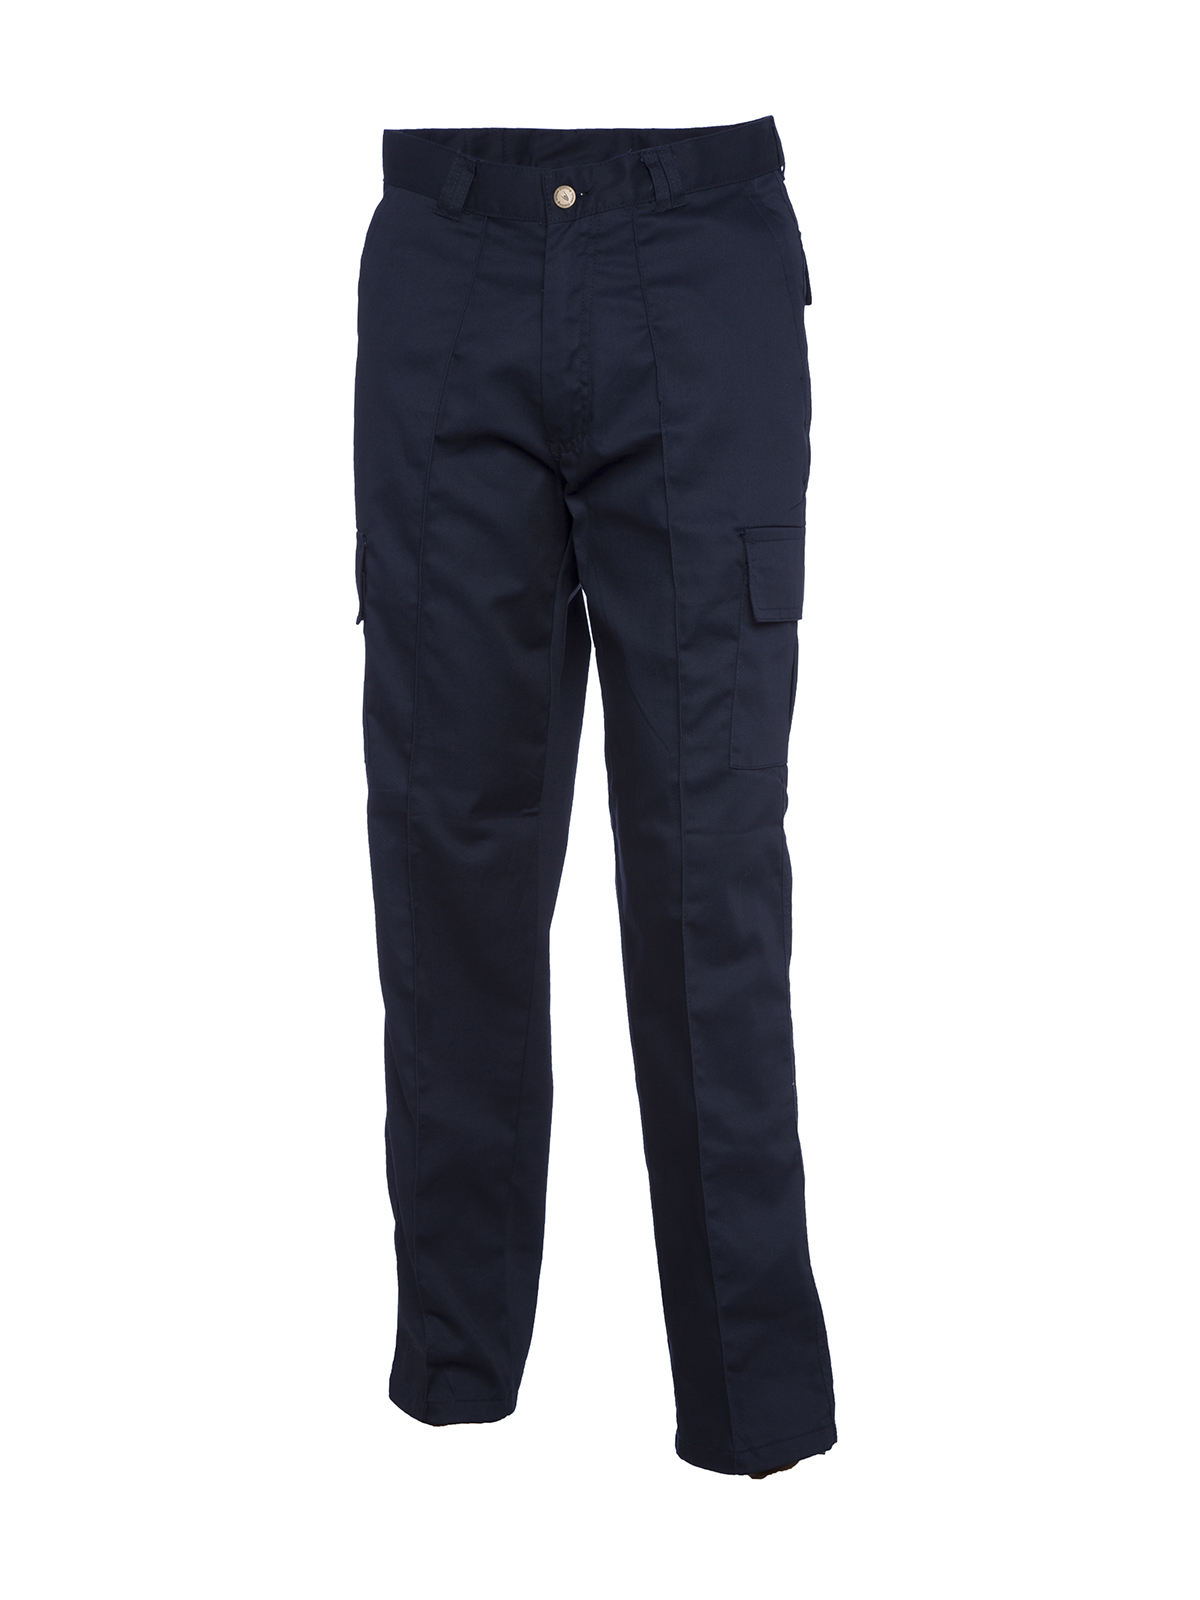 Cargo Trousers, Navy Blue - 40S